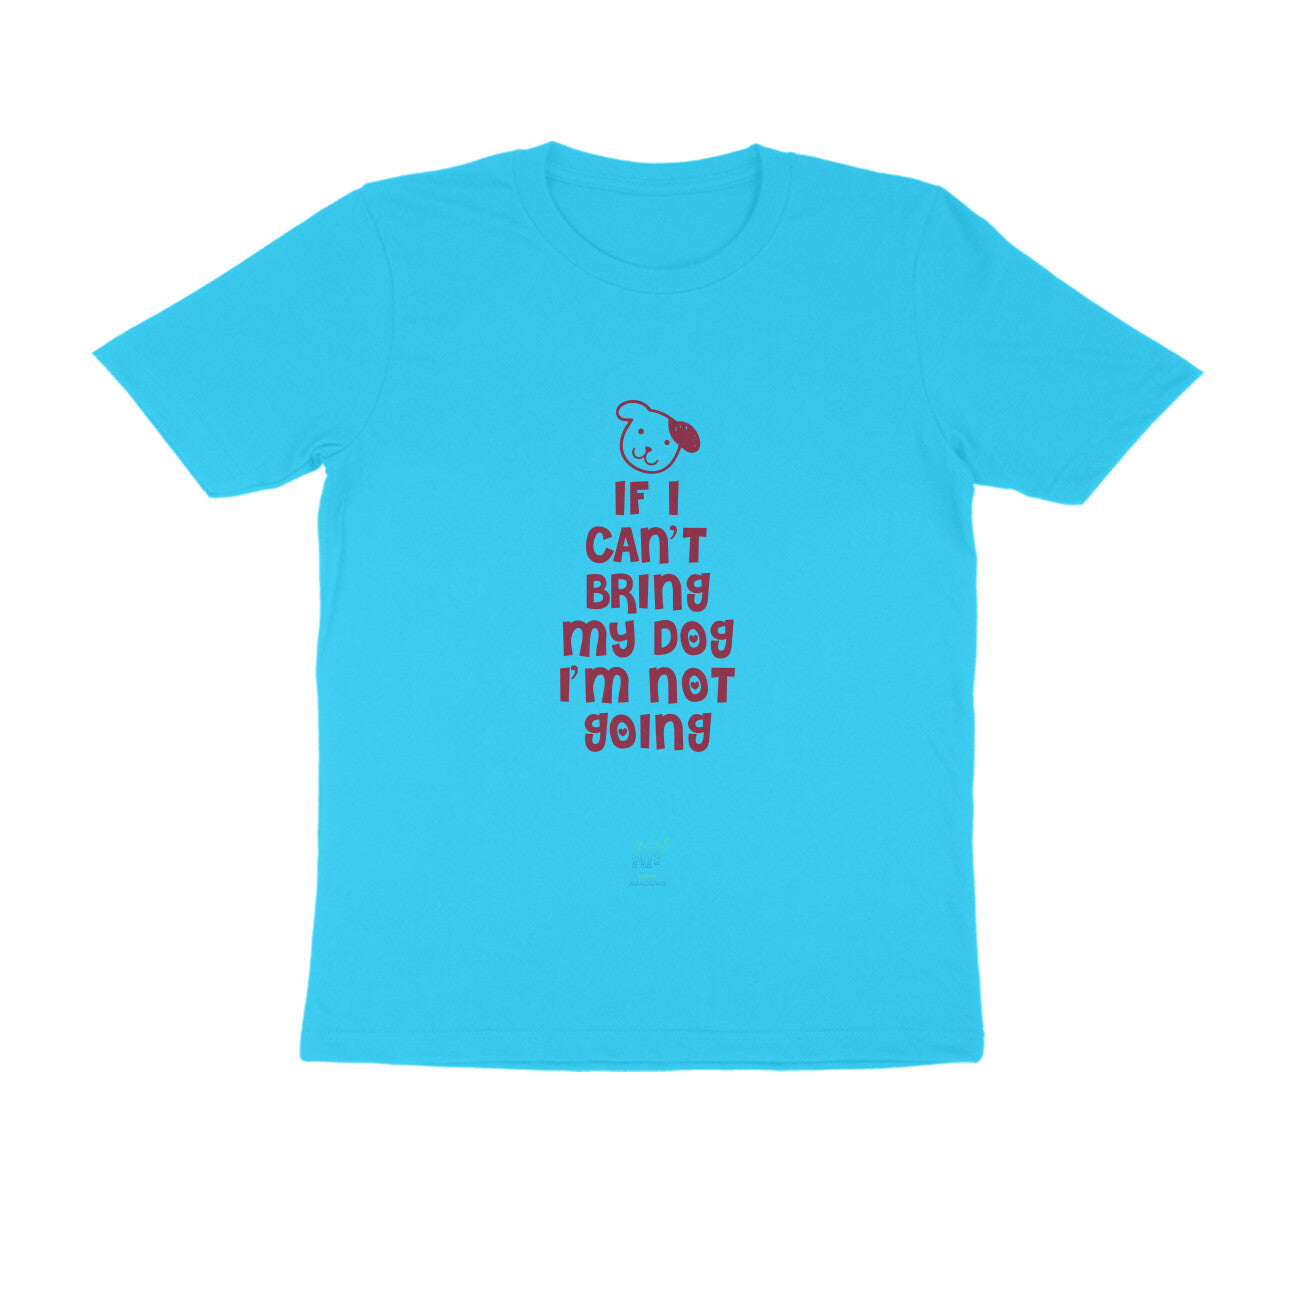 If I can't bring my dog-Round Neck Unisex Tee